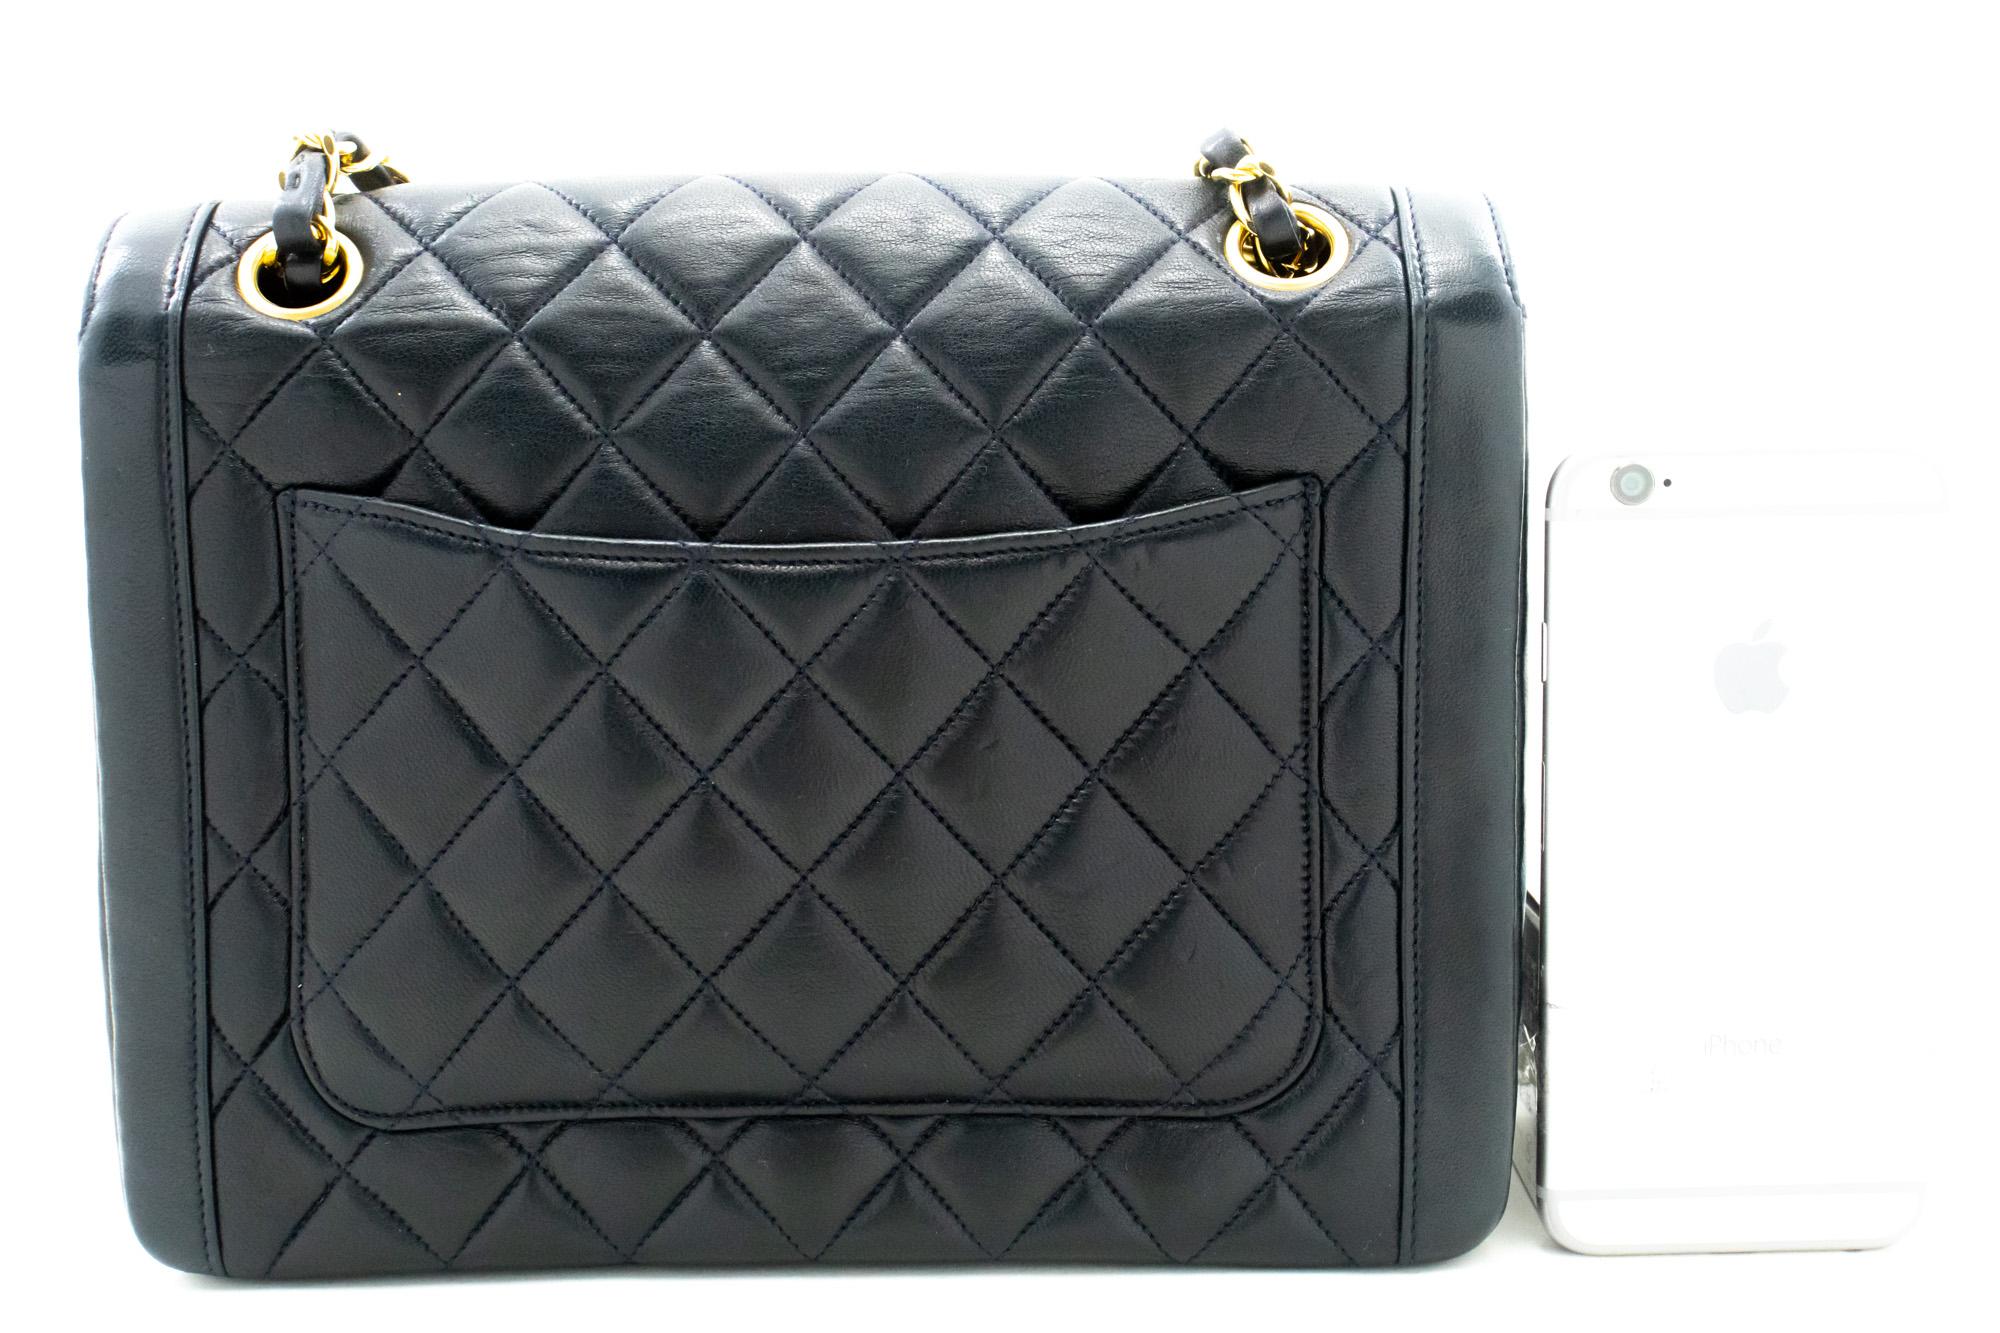 CHANEL NAVY Vintage Chain Shoulder Bag Lambskin Flap Quilted Purse In Good Condition For Sale In Takamatsu-shi, JP